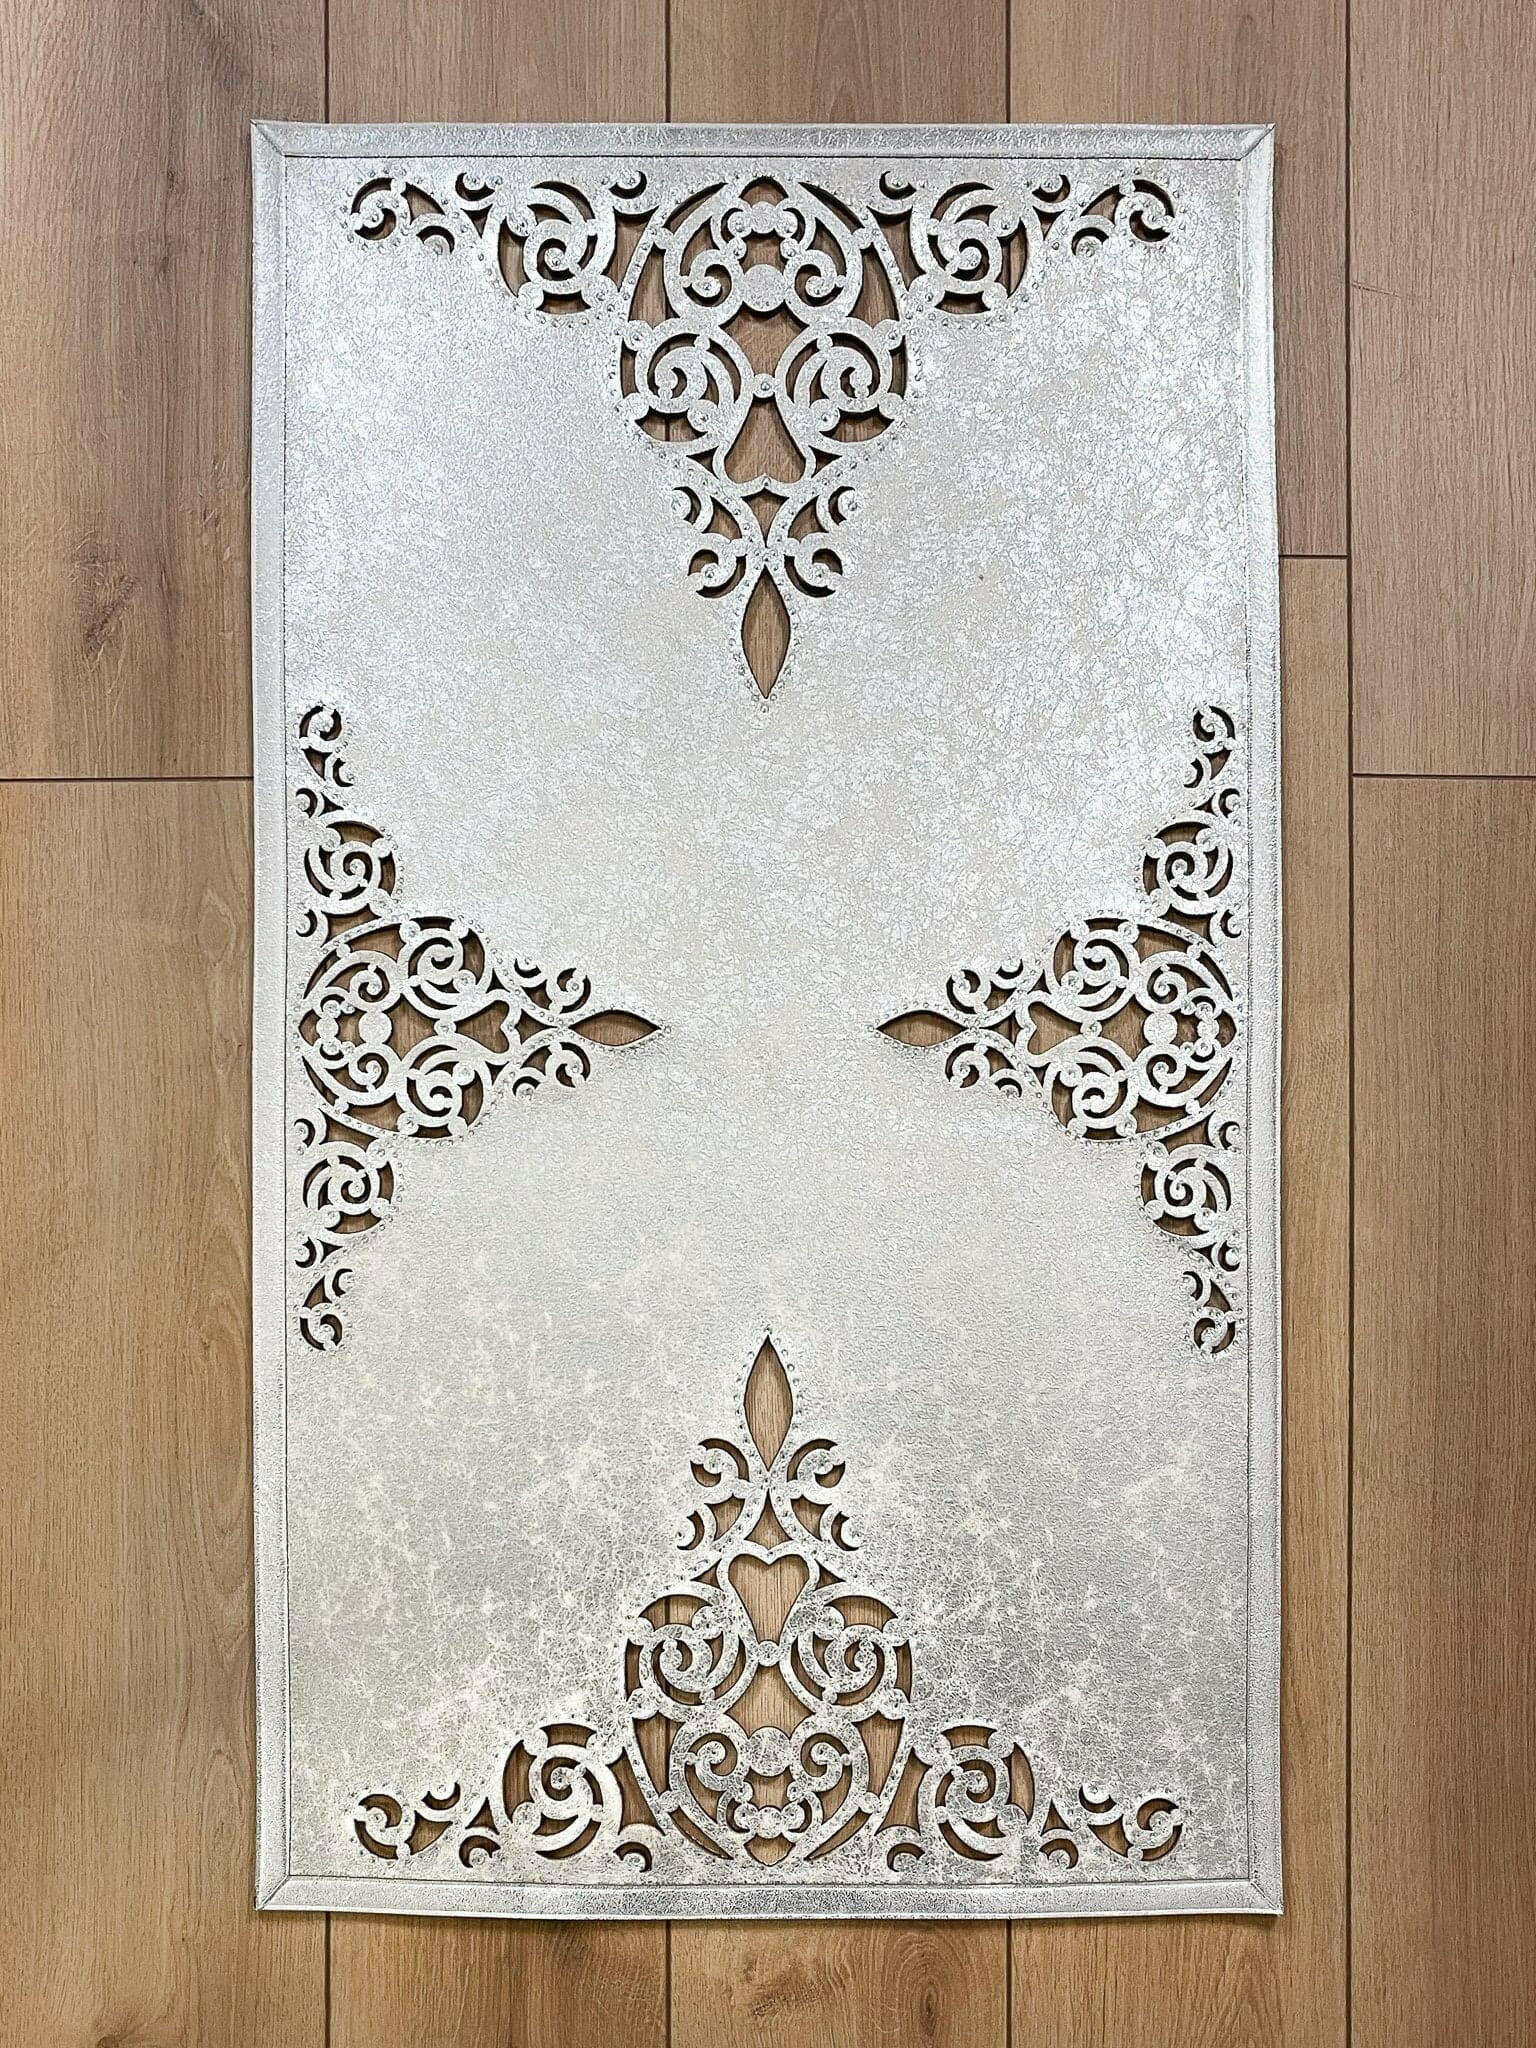 Sena Rug Aged Silver Grey Color Rug - Creative Home Designs Rugs, Oriental Style Cut Out Laser Turkish Carpet With Diamonds, Non Slip Durable Mat